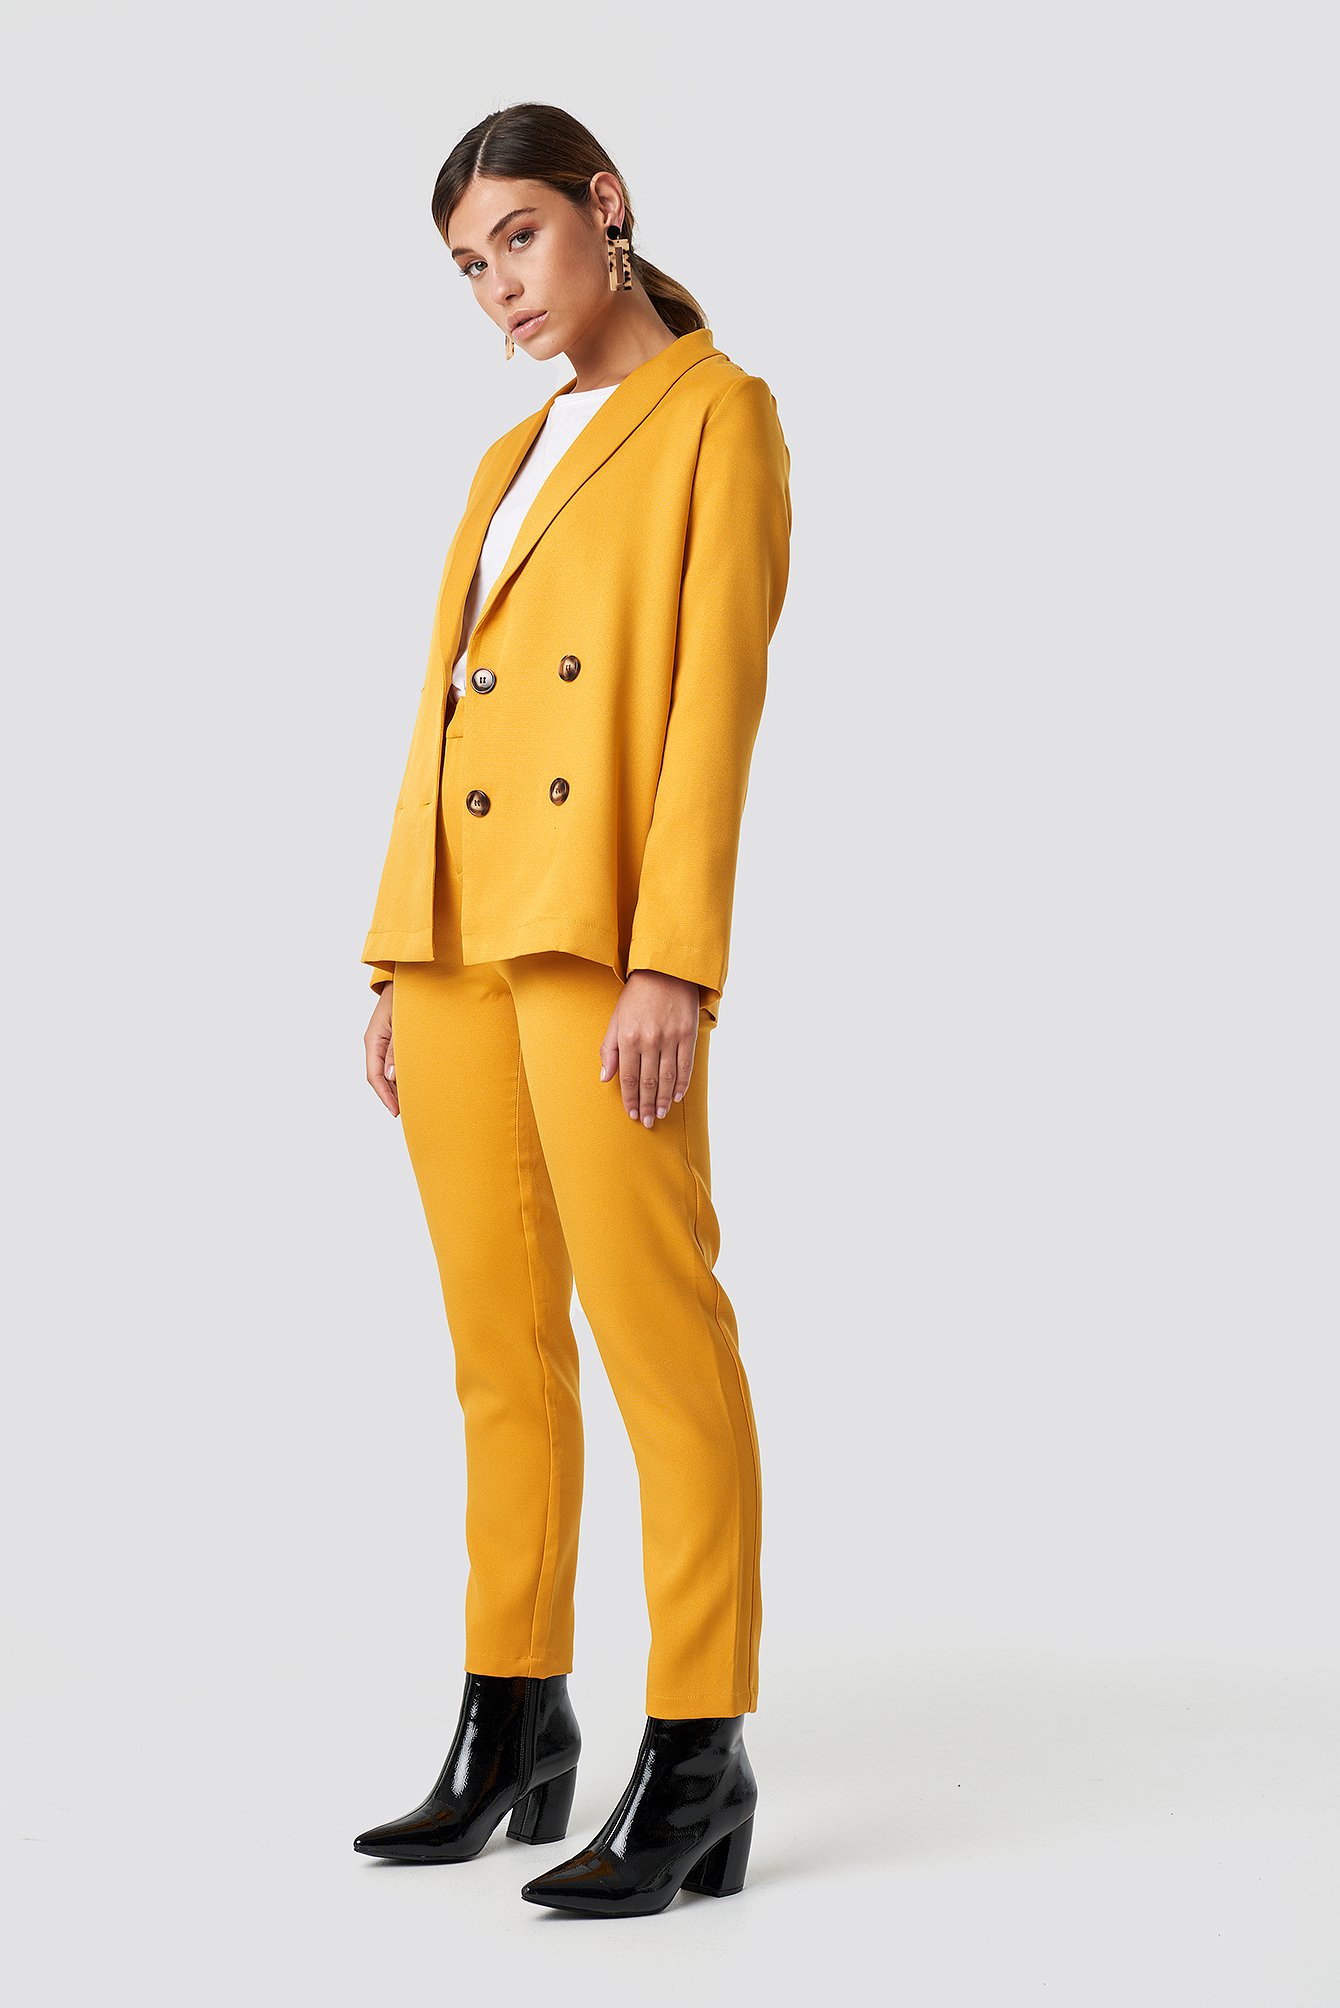 Mustard Yellow NA-KD Classic Fitted Suit Pants